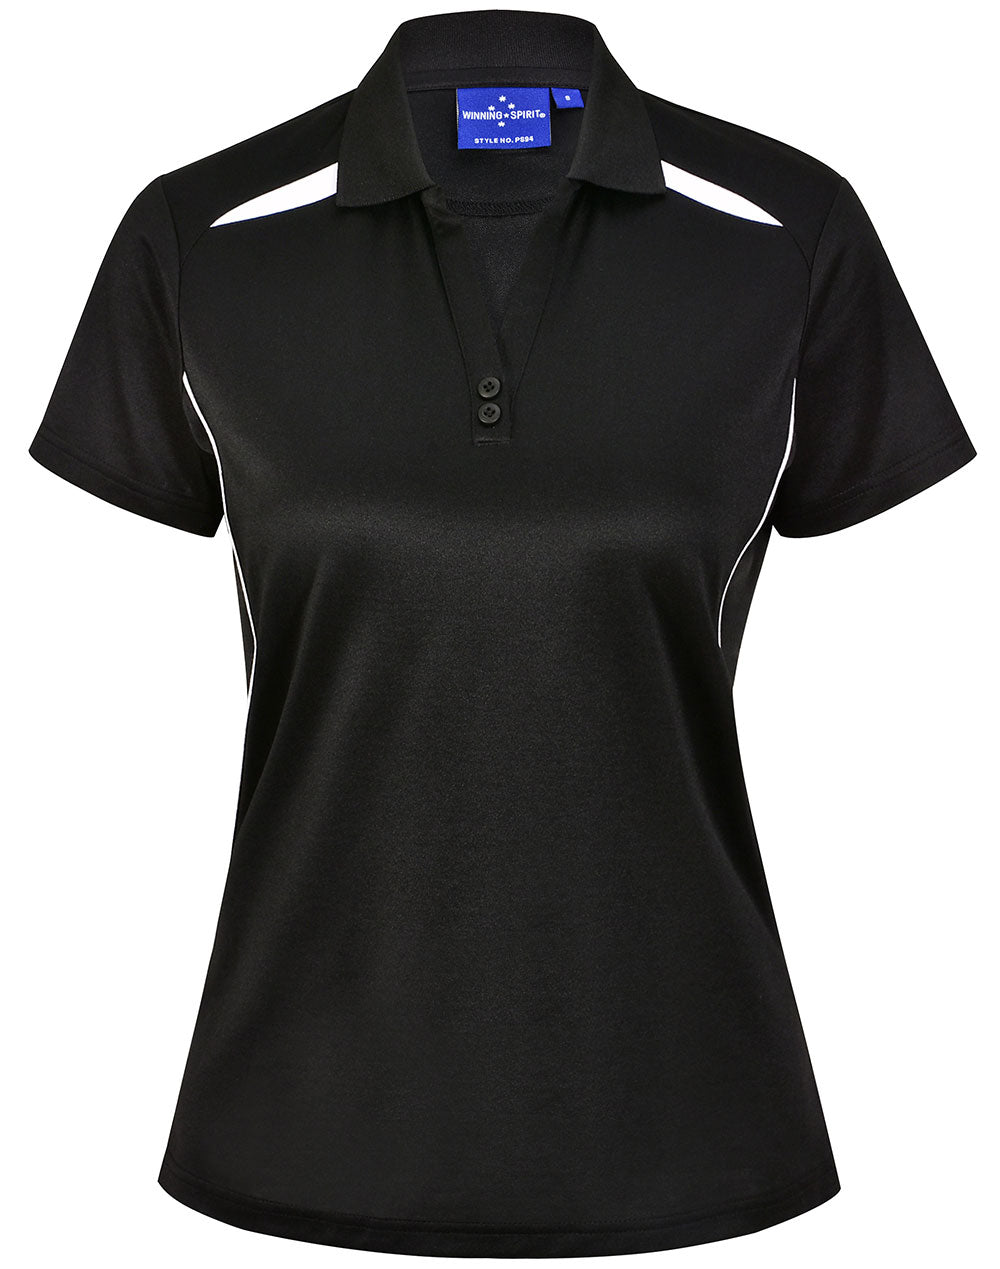 Winning Spirit Women's Sustainable Poly-Cotton Contrast Polo PS94 - Simply Scrubs Australia